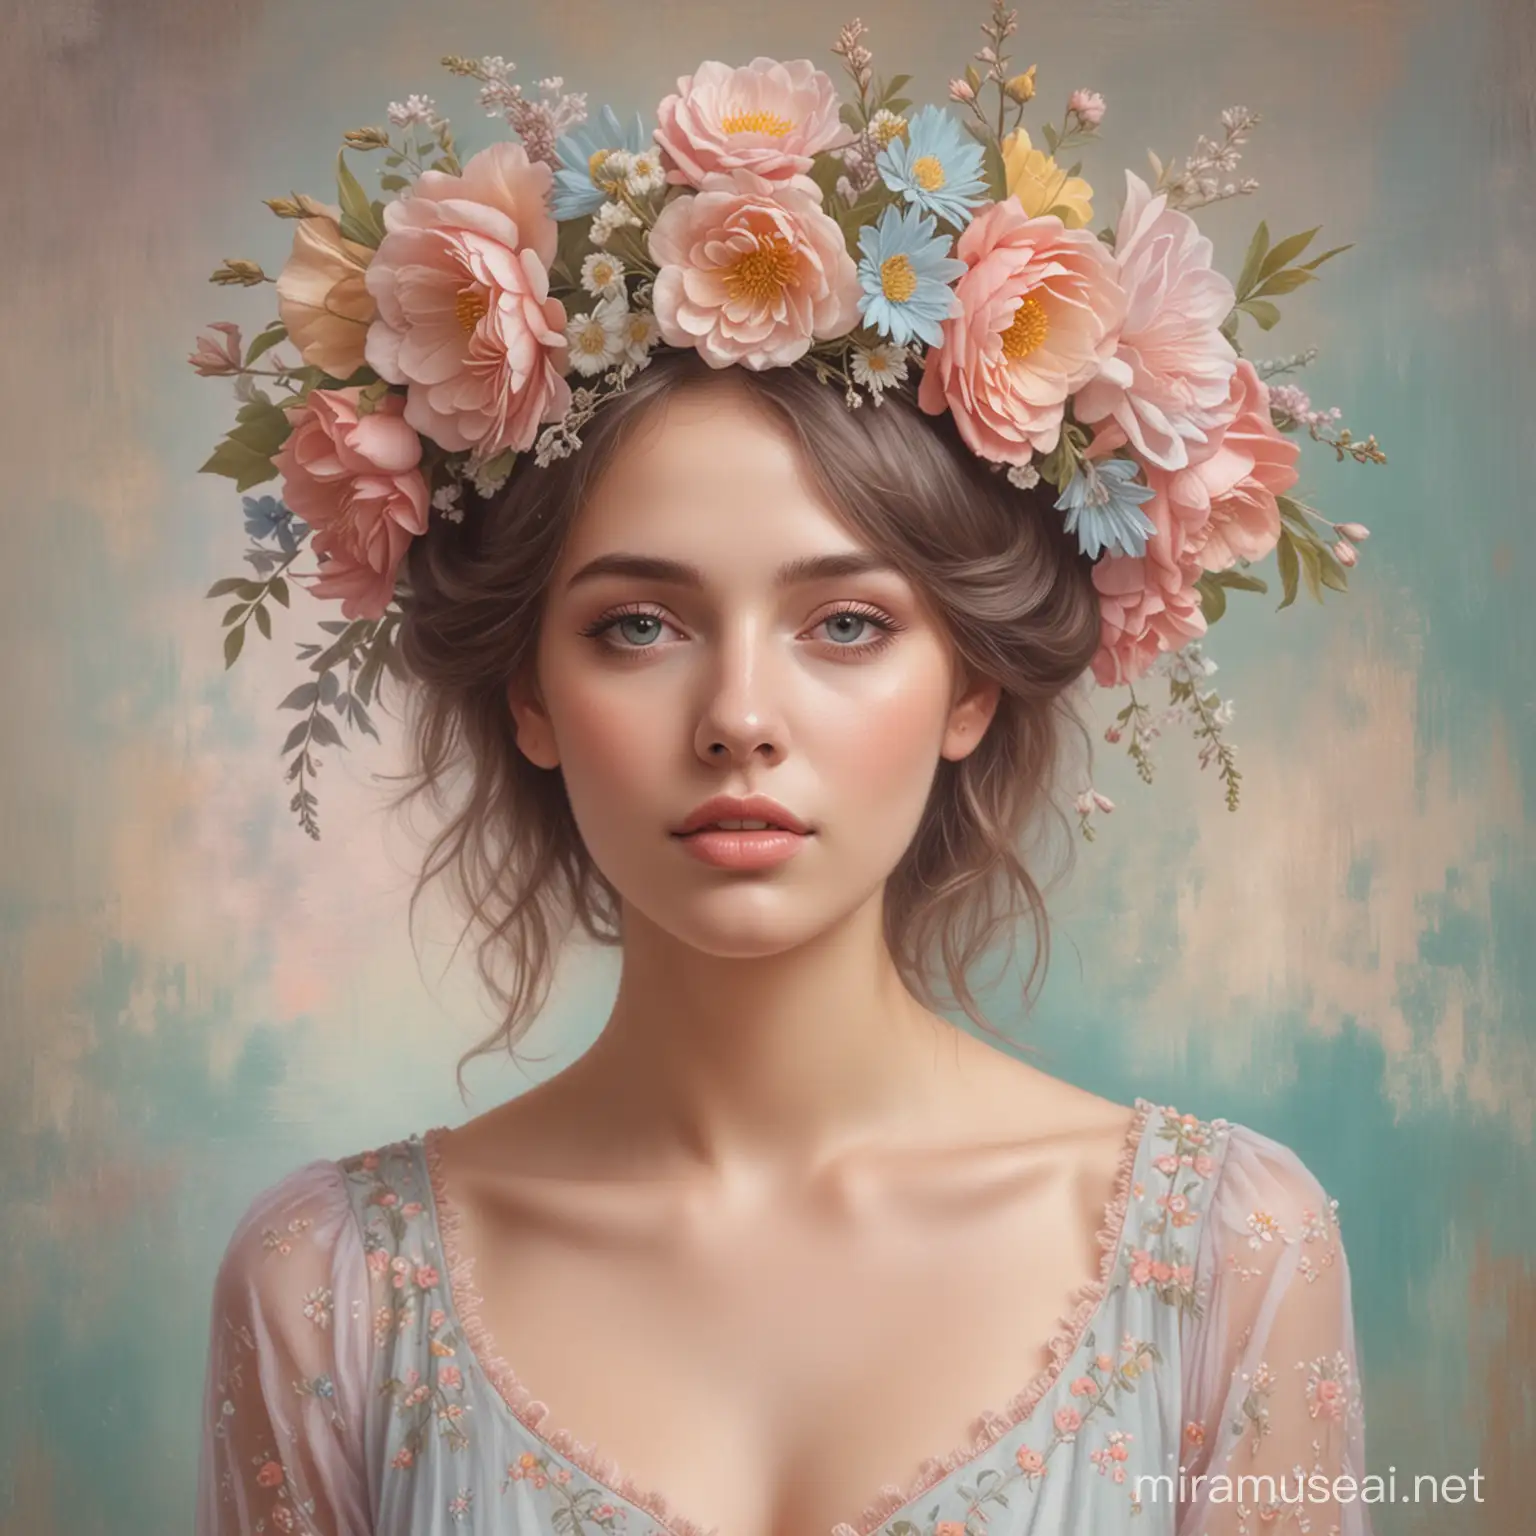 Pastel Drawing of a Dreamy Woman with Flowers Adorning Her Dress and Background